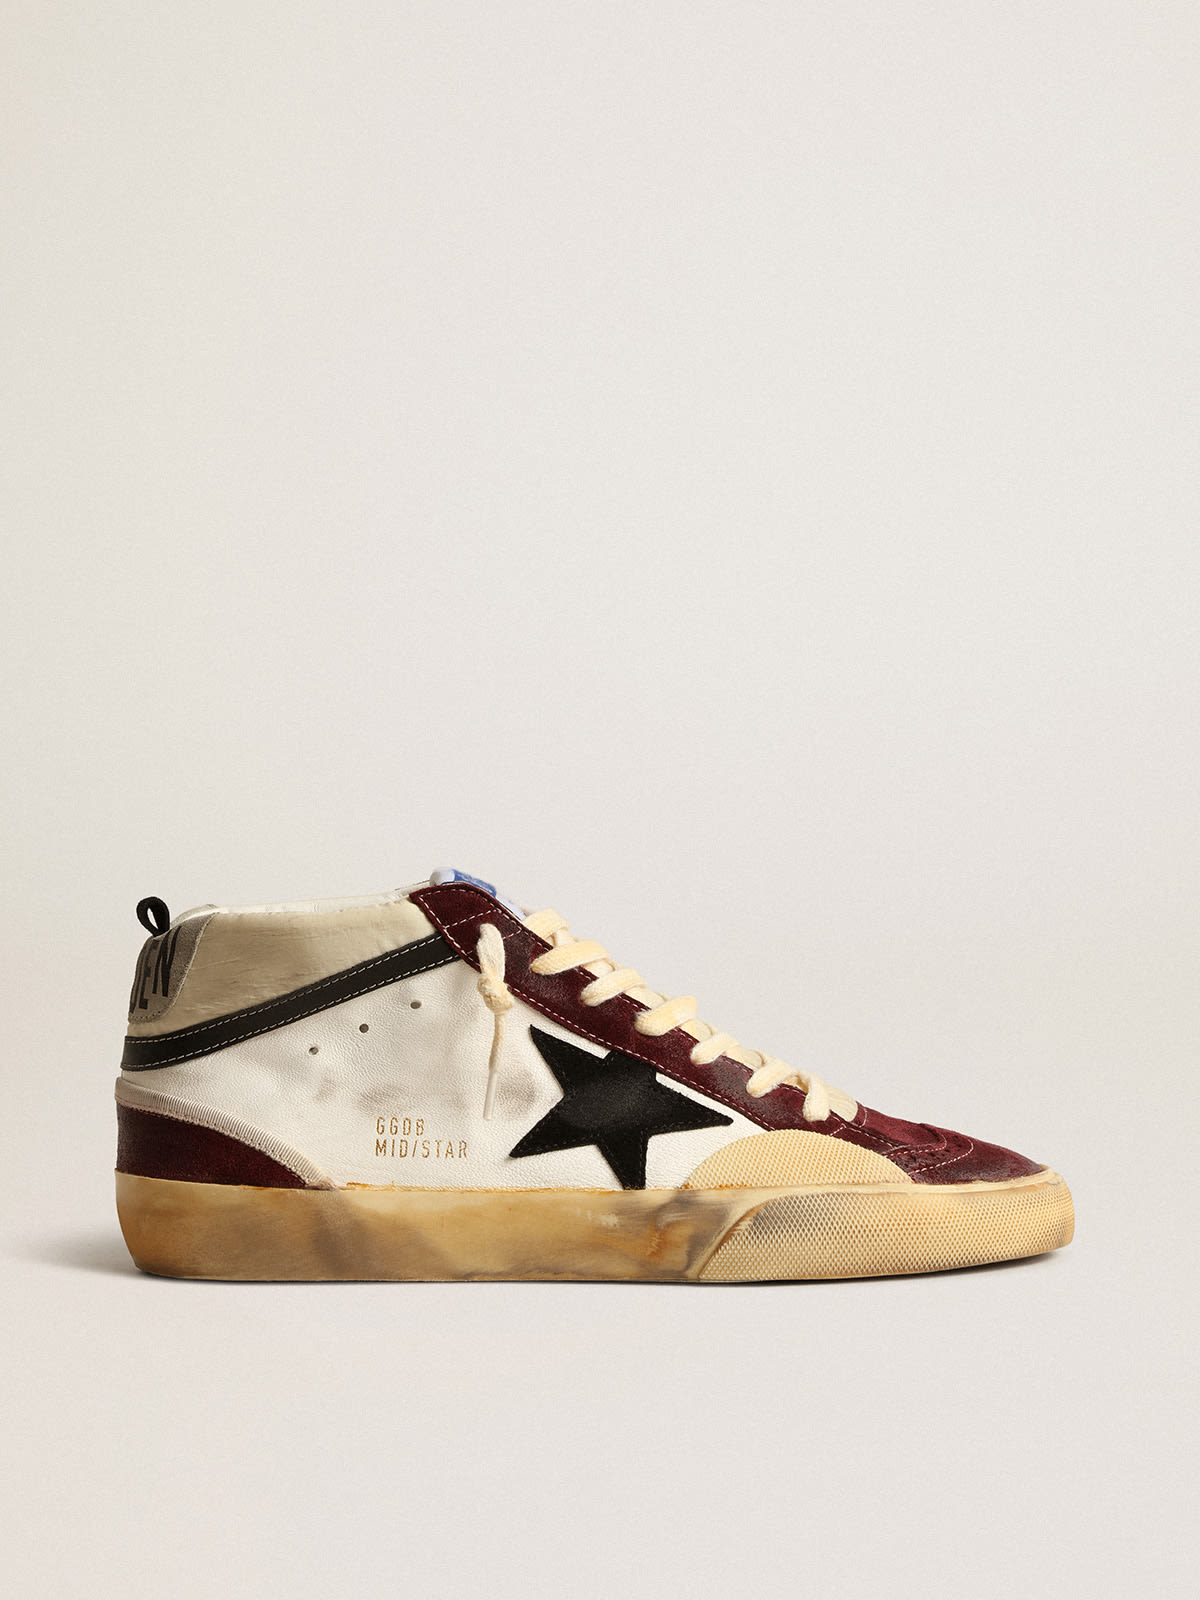 Golden Goose - Mid Star in nappa with black suede star and wine-red inserts in 